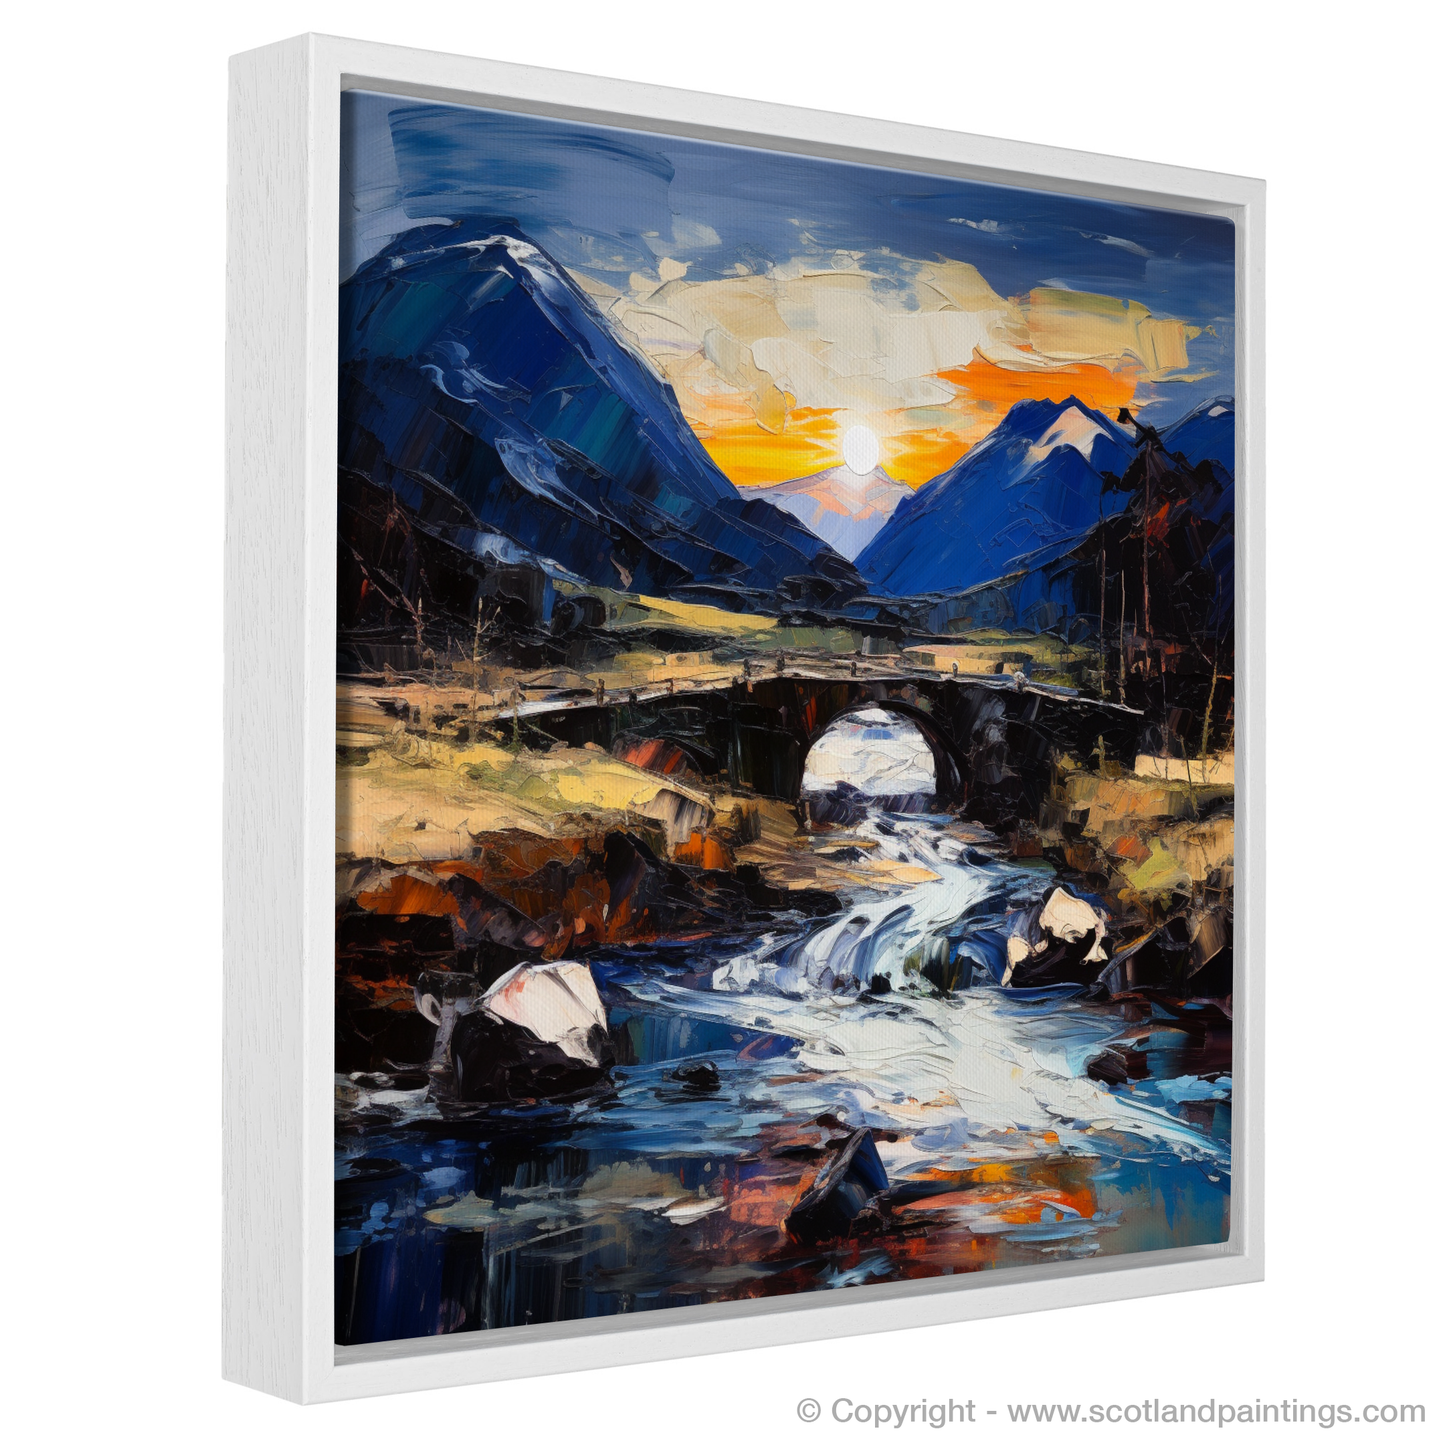 Painting and Art Print of Rustic bridge at twilight in Glencoe entitled "Twilight Serenity at Rustic Bridge in Glencoe".